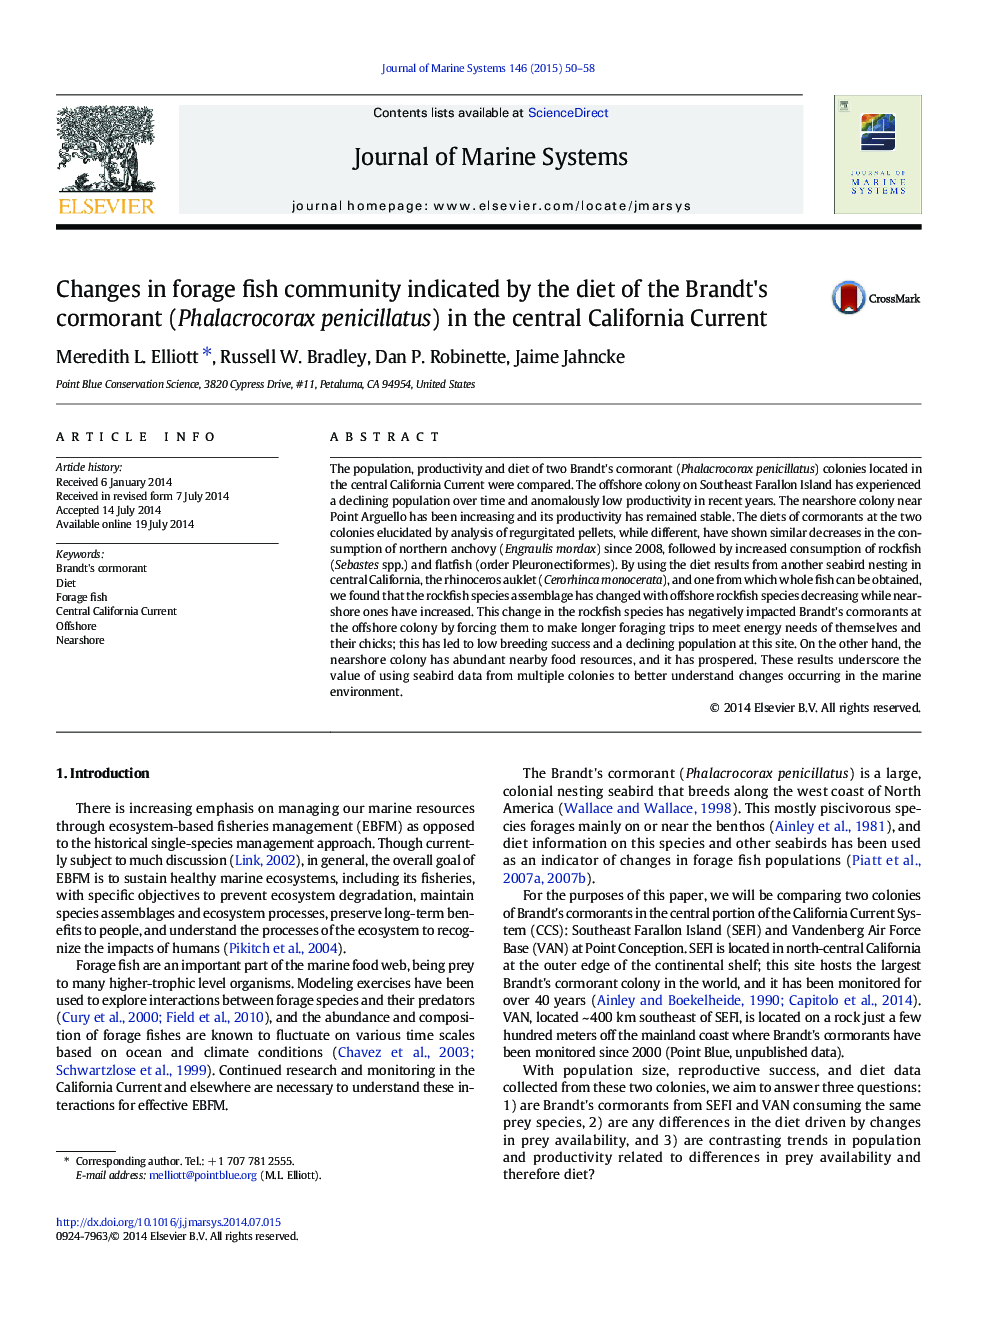 Changes in forage fish community indicated by the diet of the Brandt's cormorant (Phalacrocorax penicillatus) in the central California Current